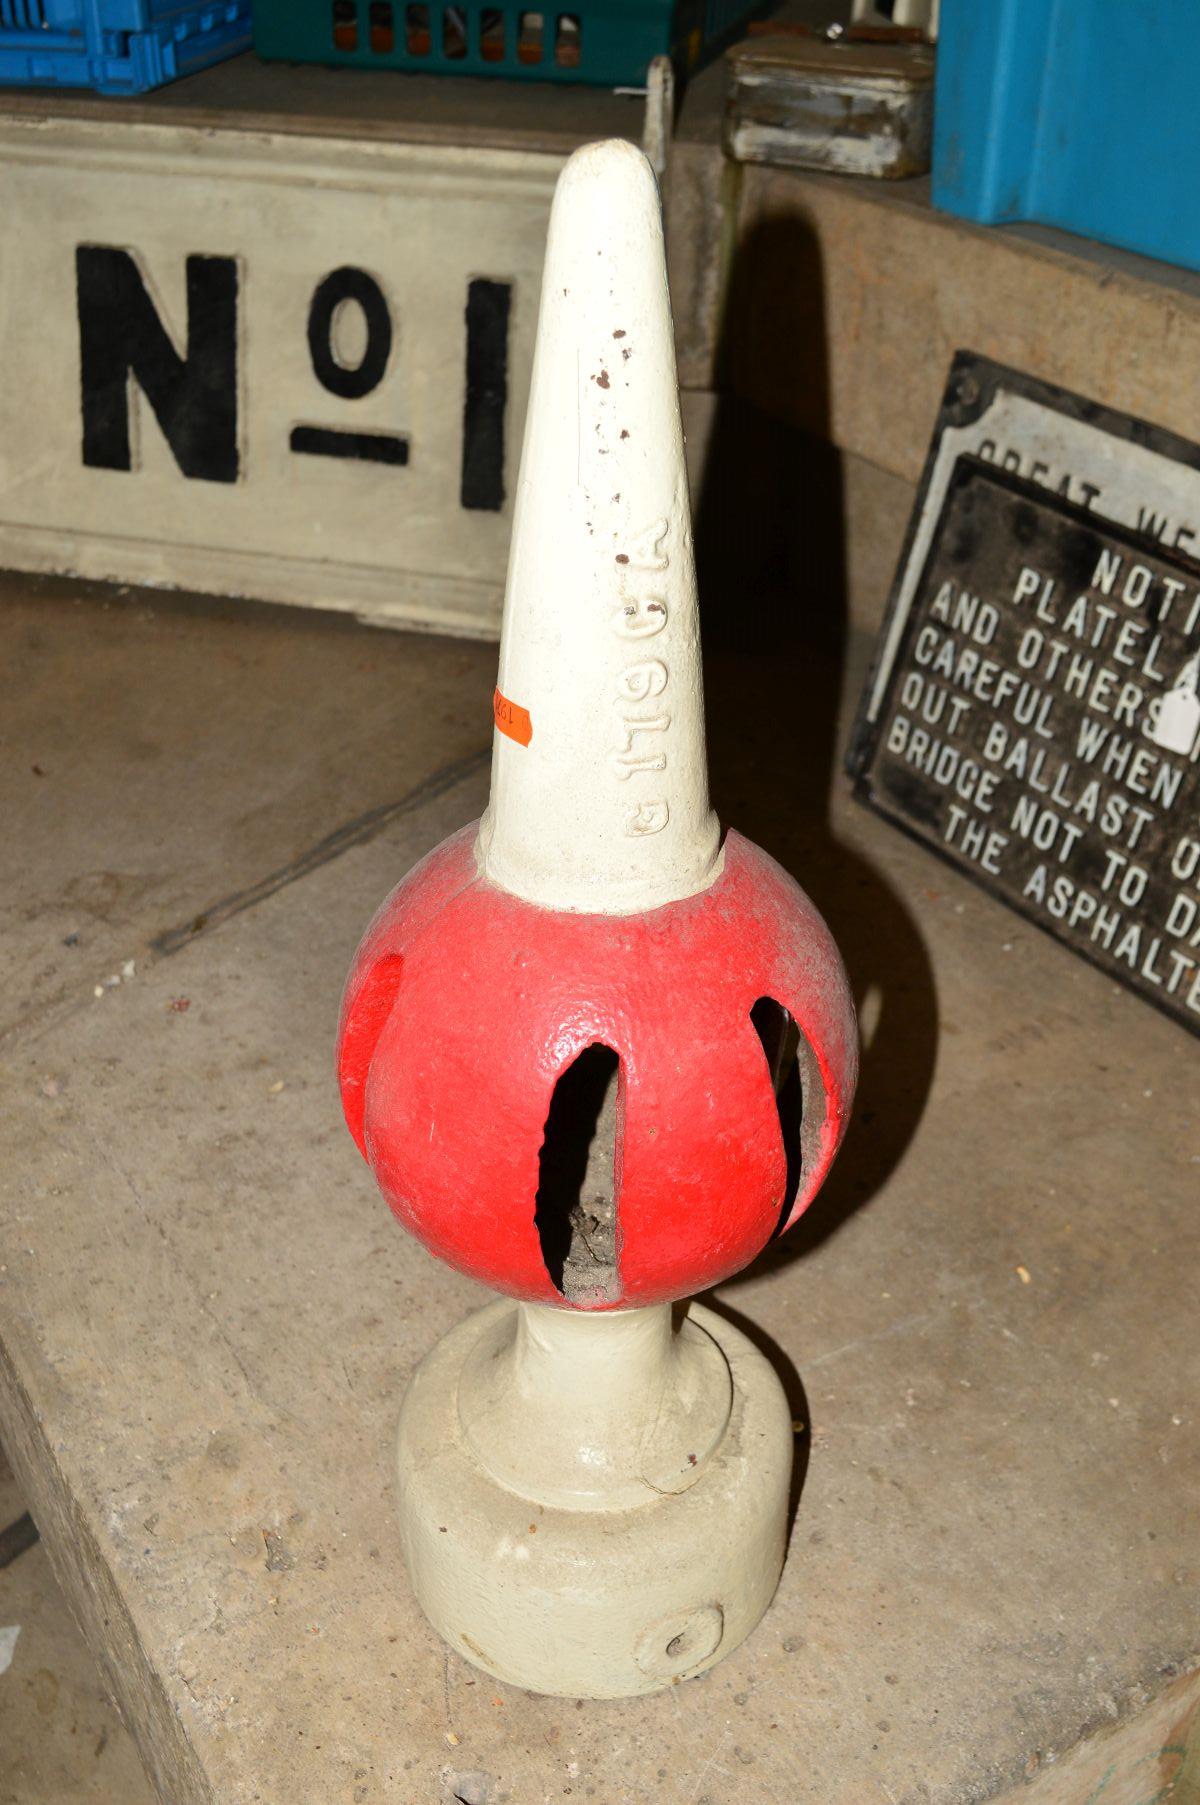 A CAST IRON BALL & SPIKE SIGNAL POST FINIAL, restored, white with red ball, stamped G179CA and E,